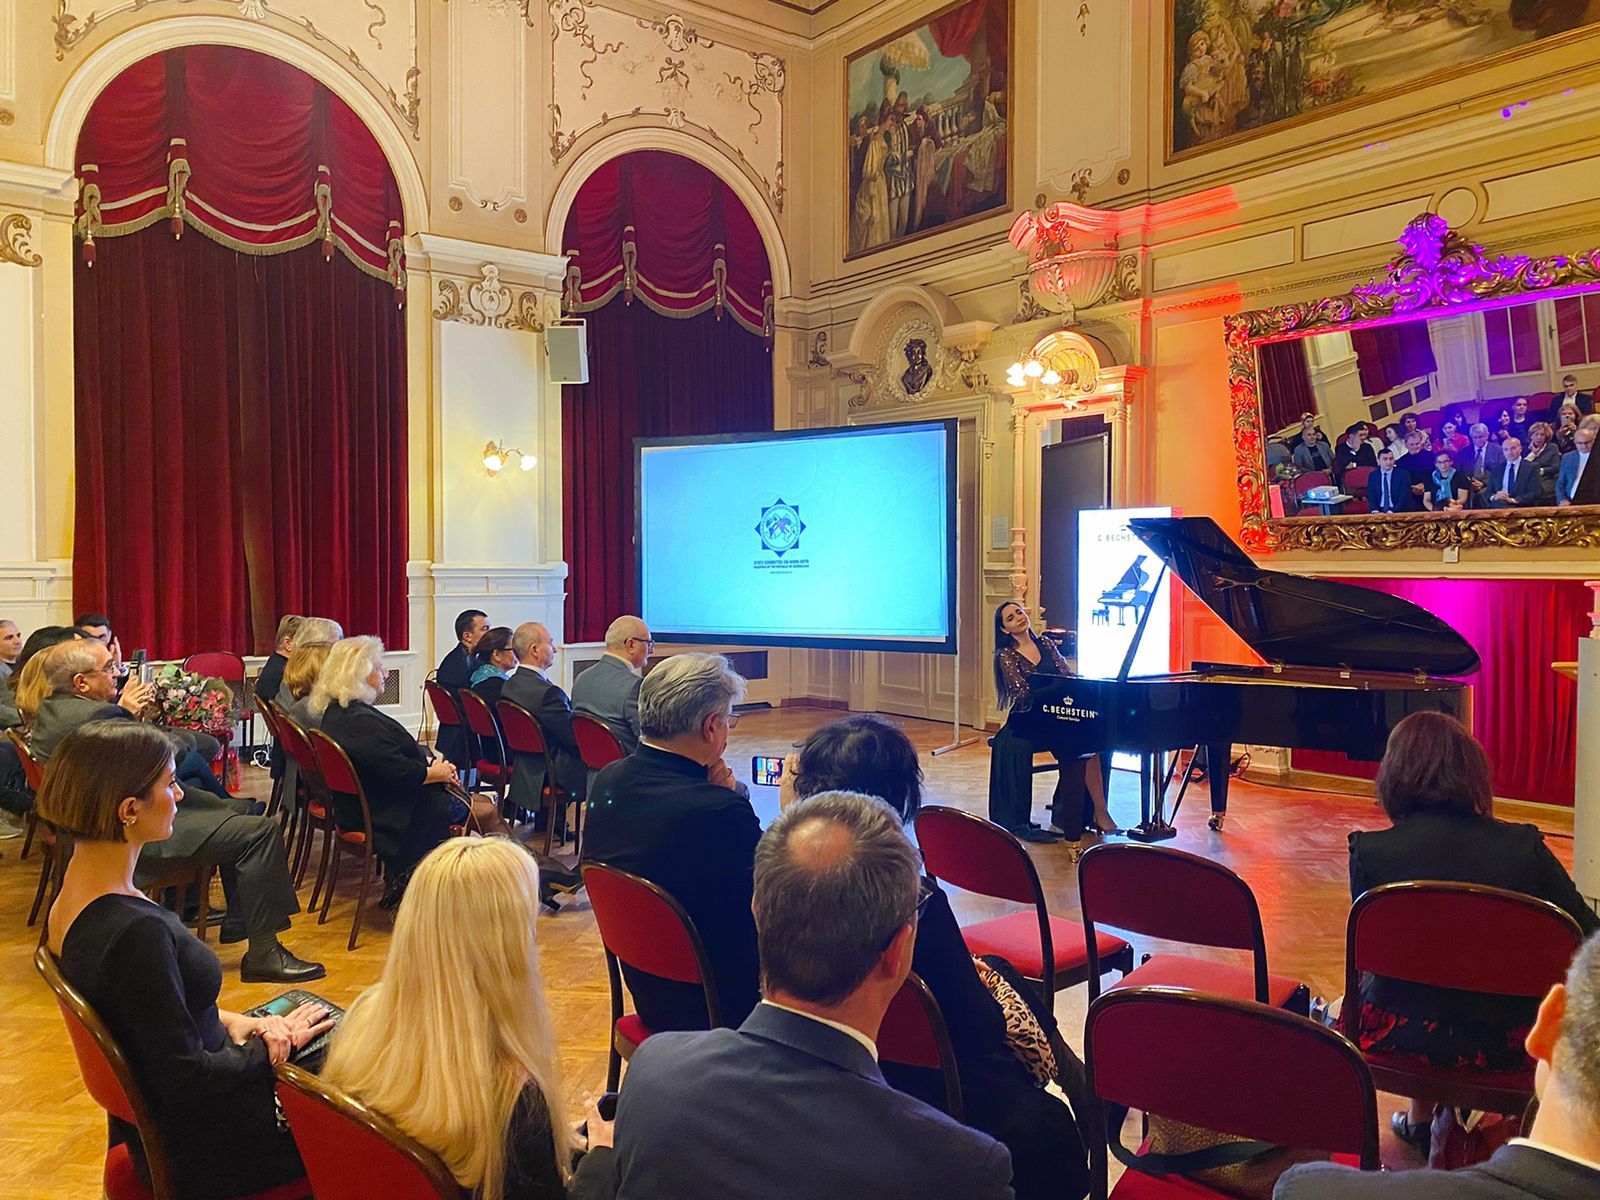 The project "Musical contribution from Azerbaijan to the world" was presented in Linz, Austria